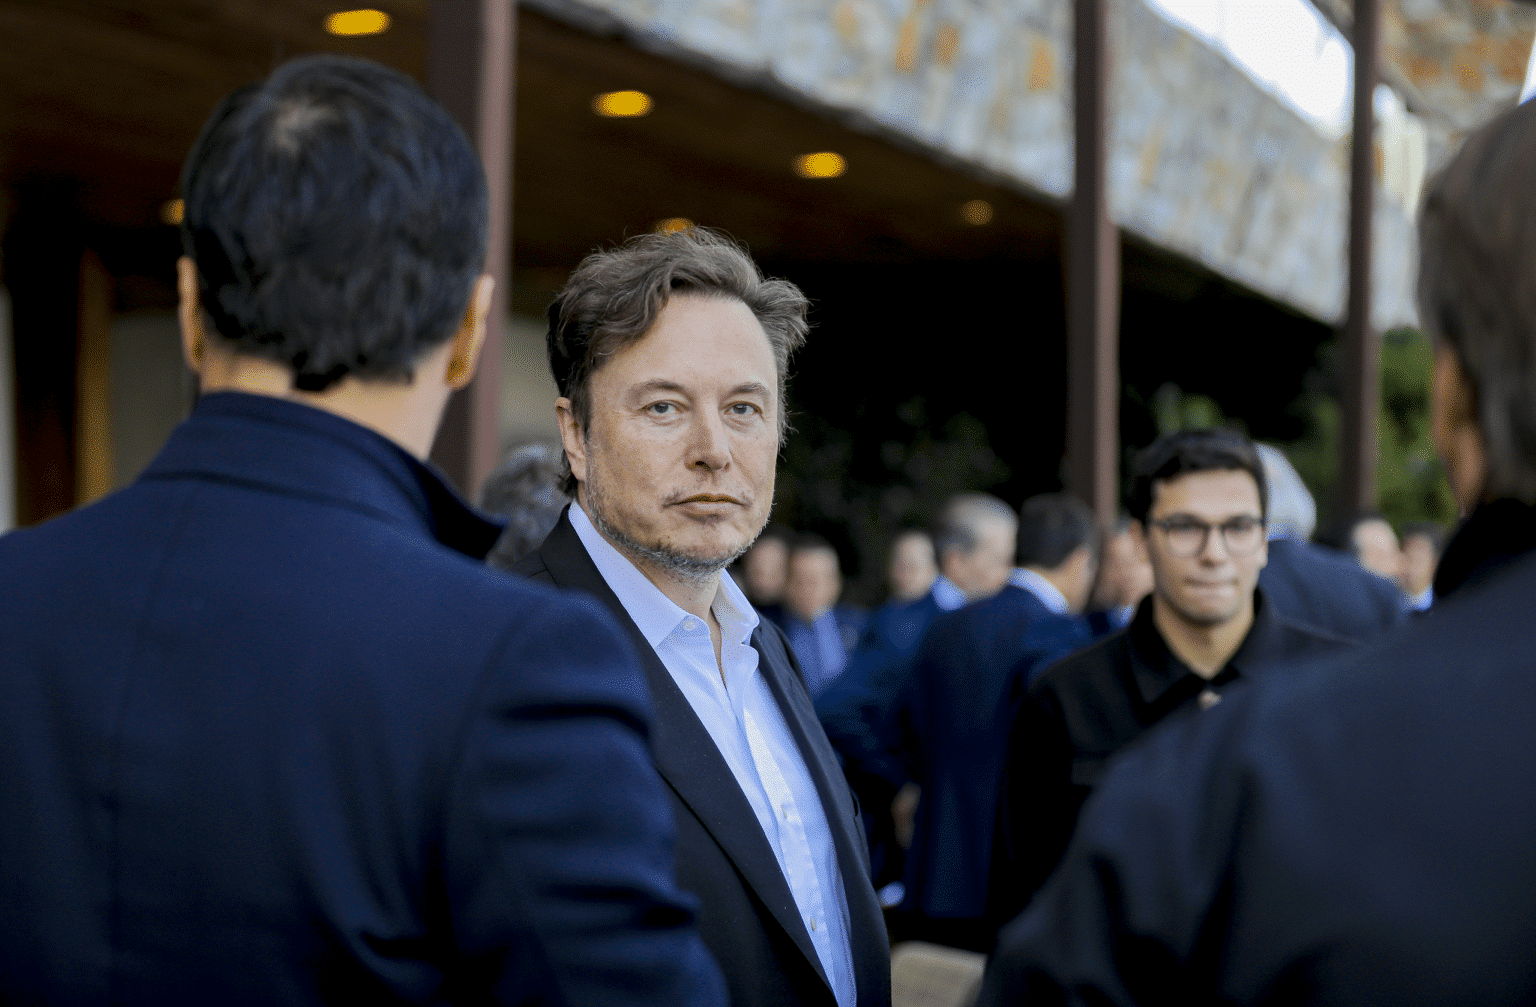 Elon Musk, Steve Wozniak Want a 6-Month Pause on AI Development to Ensure the Safety of Humanity